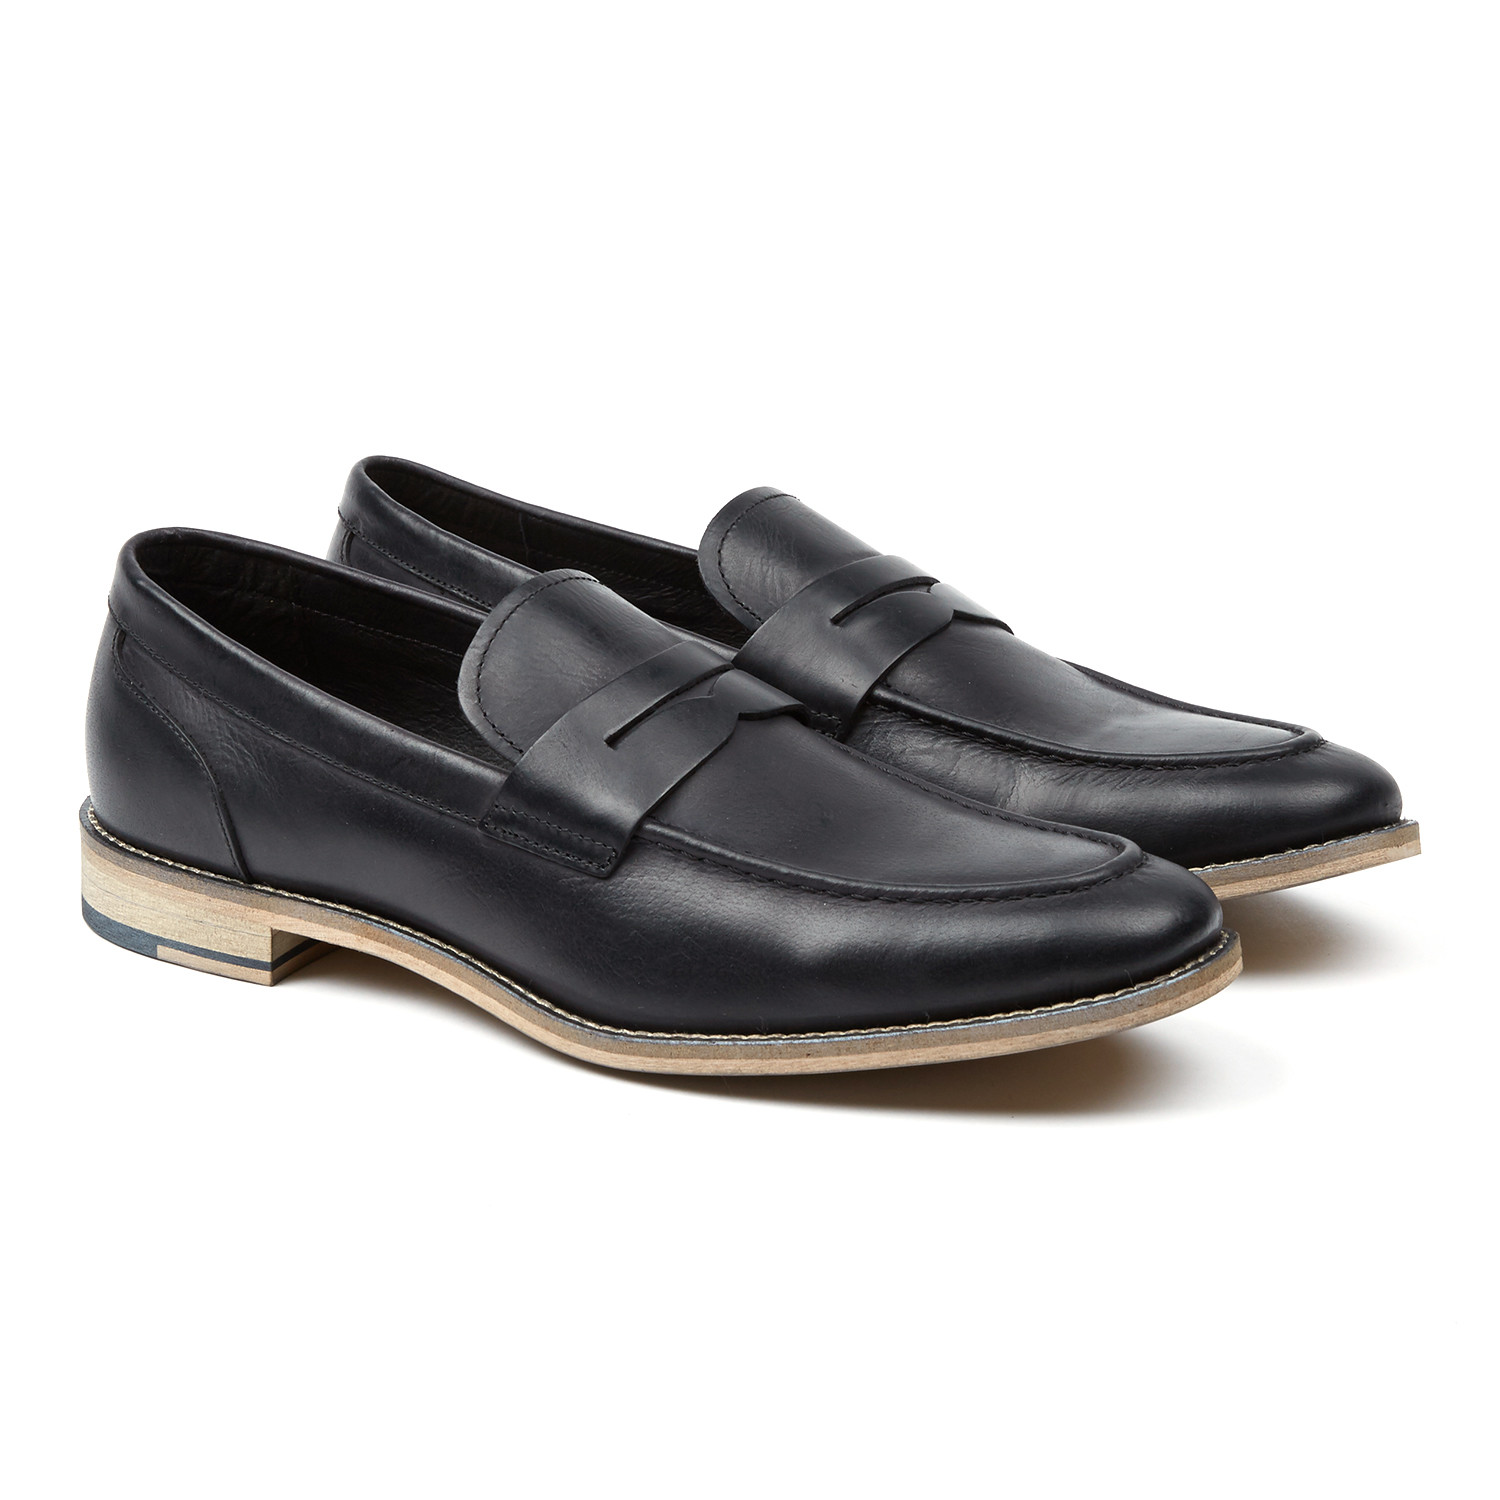 clarks penny loafers